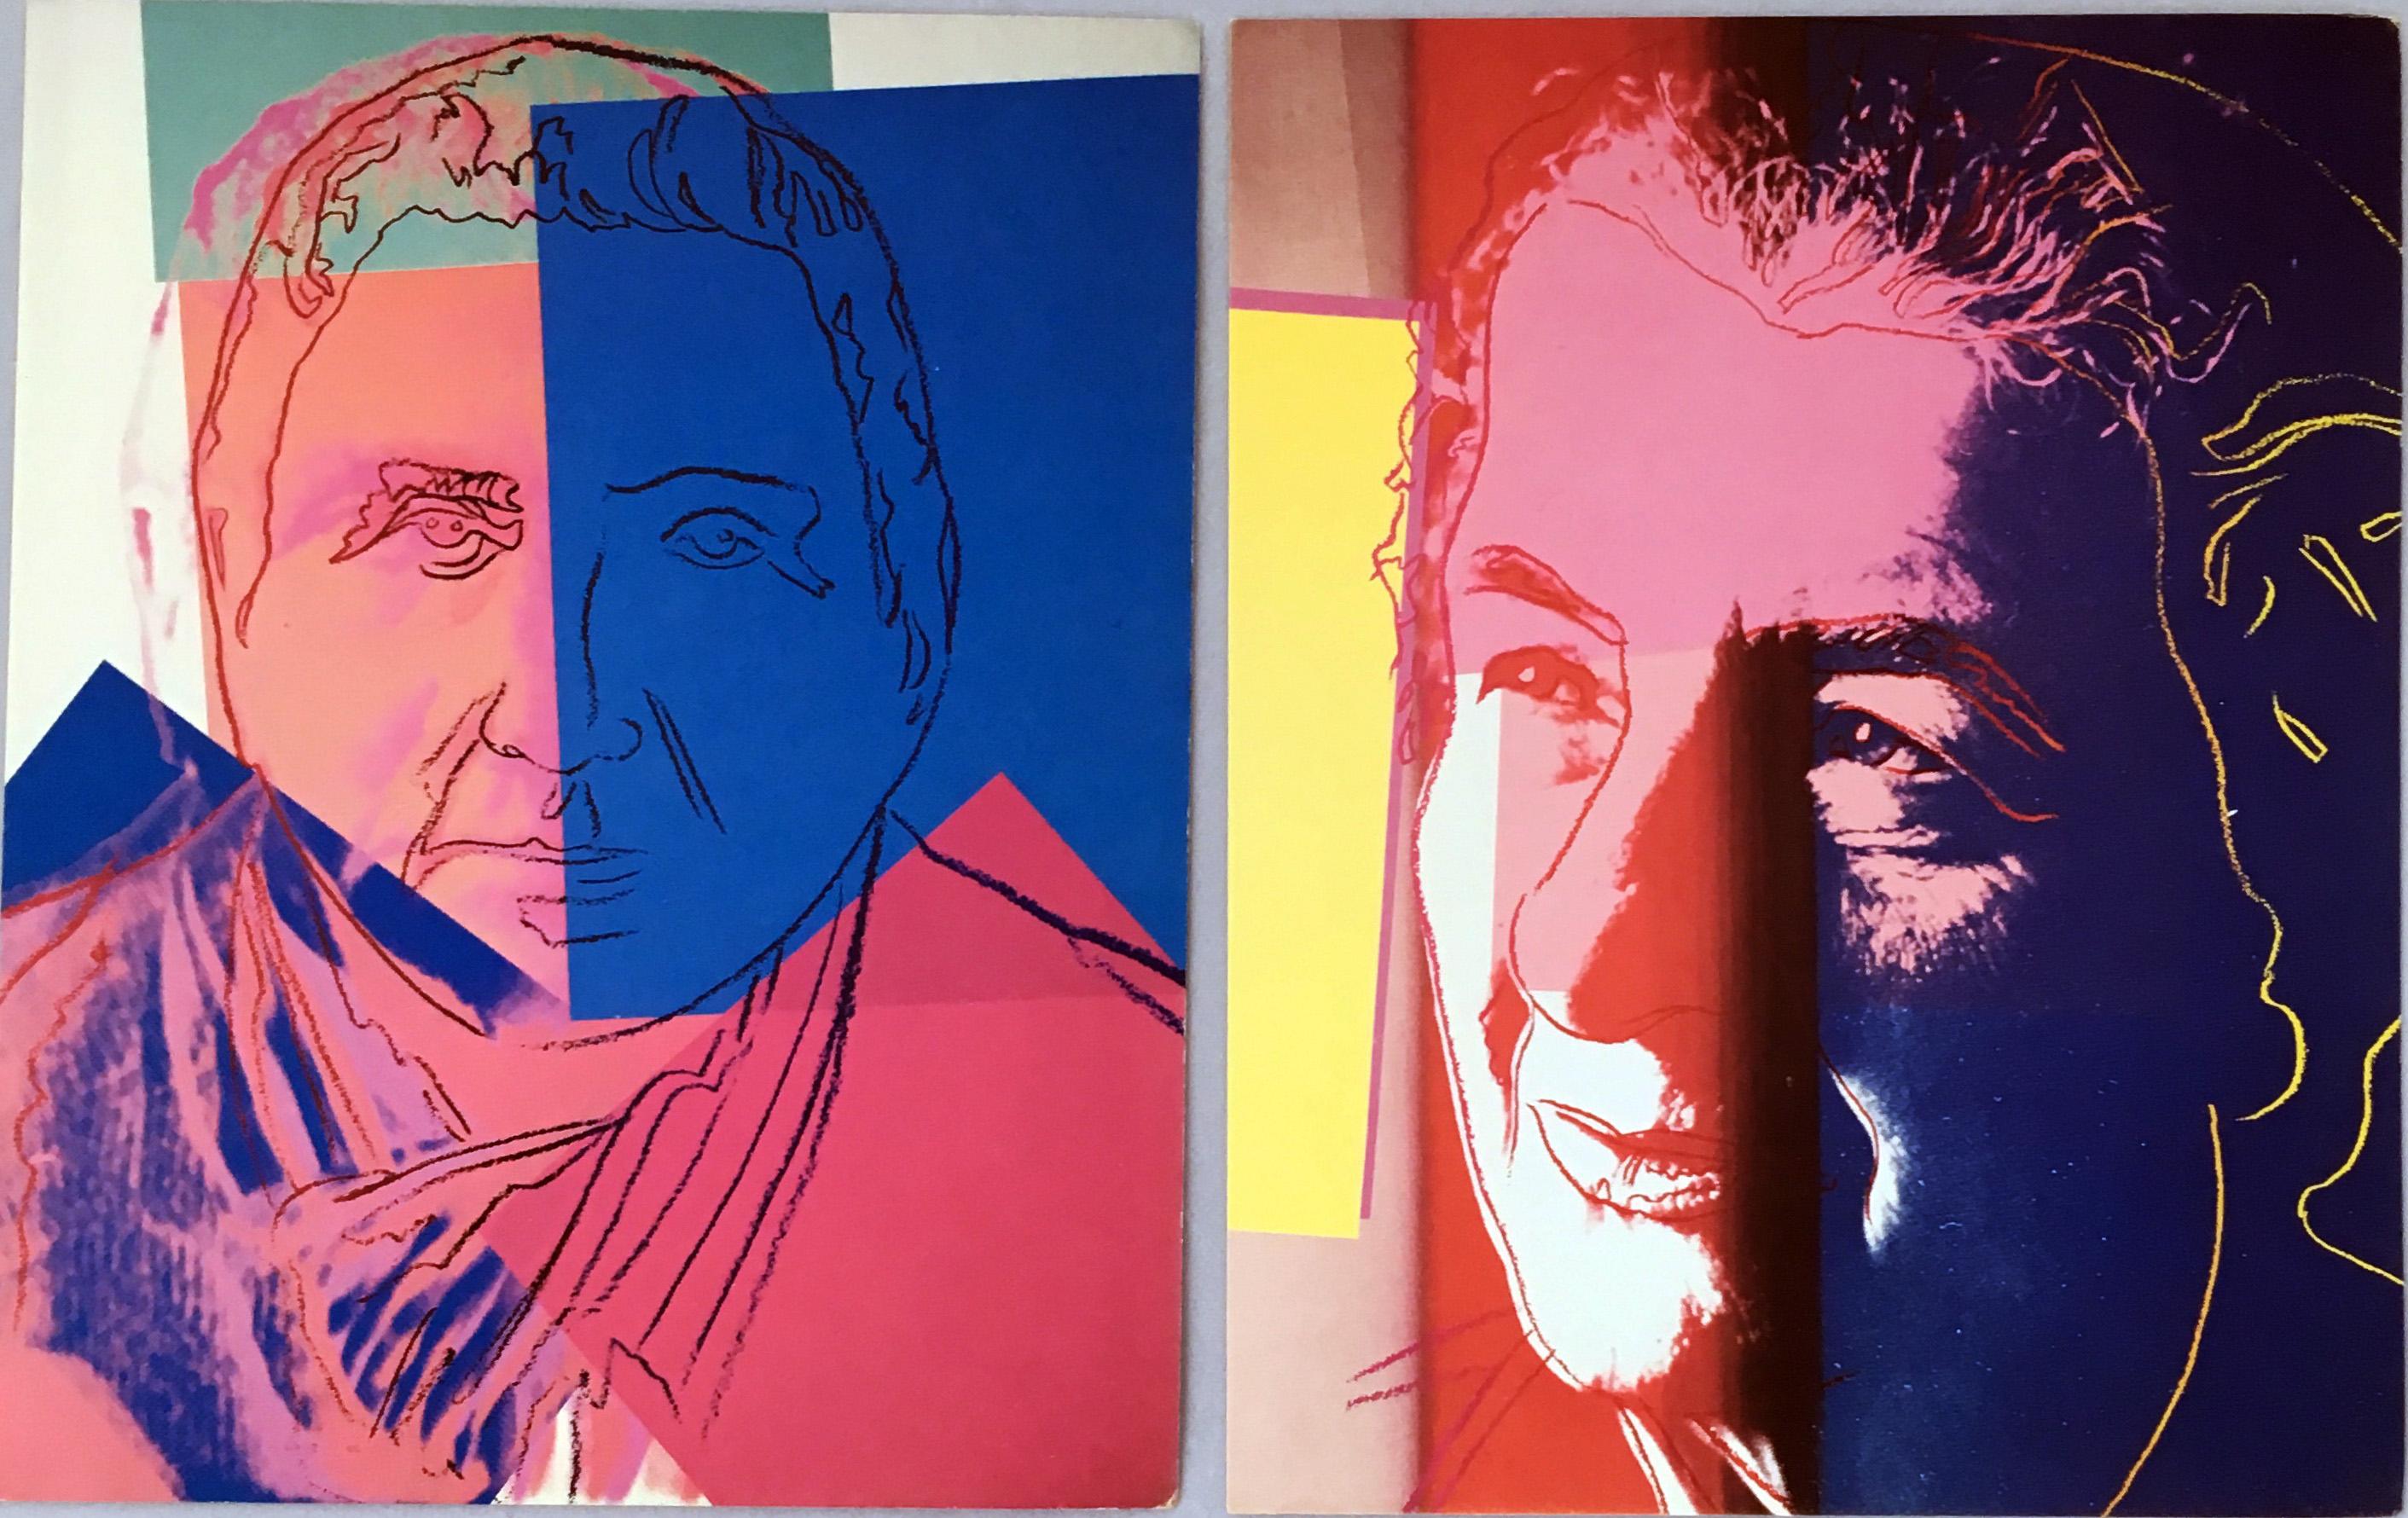 Warhol Portraits of Jews of the 20th Century  (set of ten 1980 announcements)  - Pop Art Print by (after) Andy Warhol